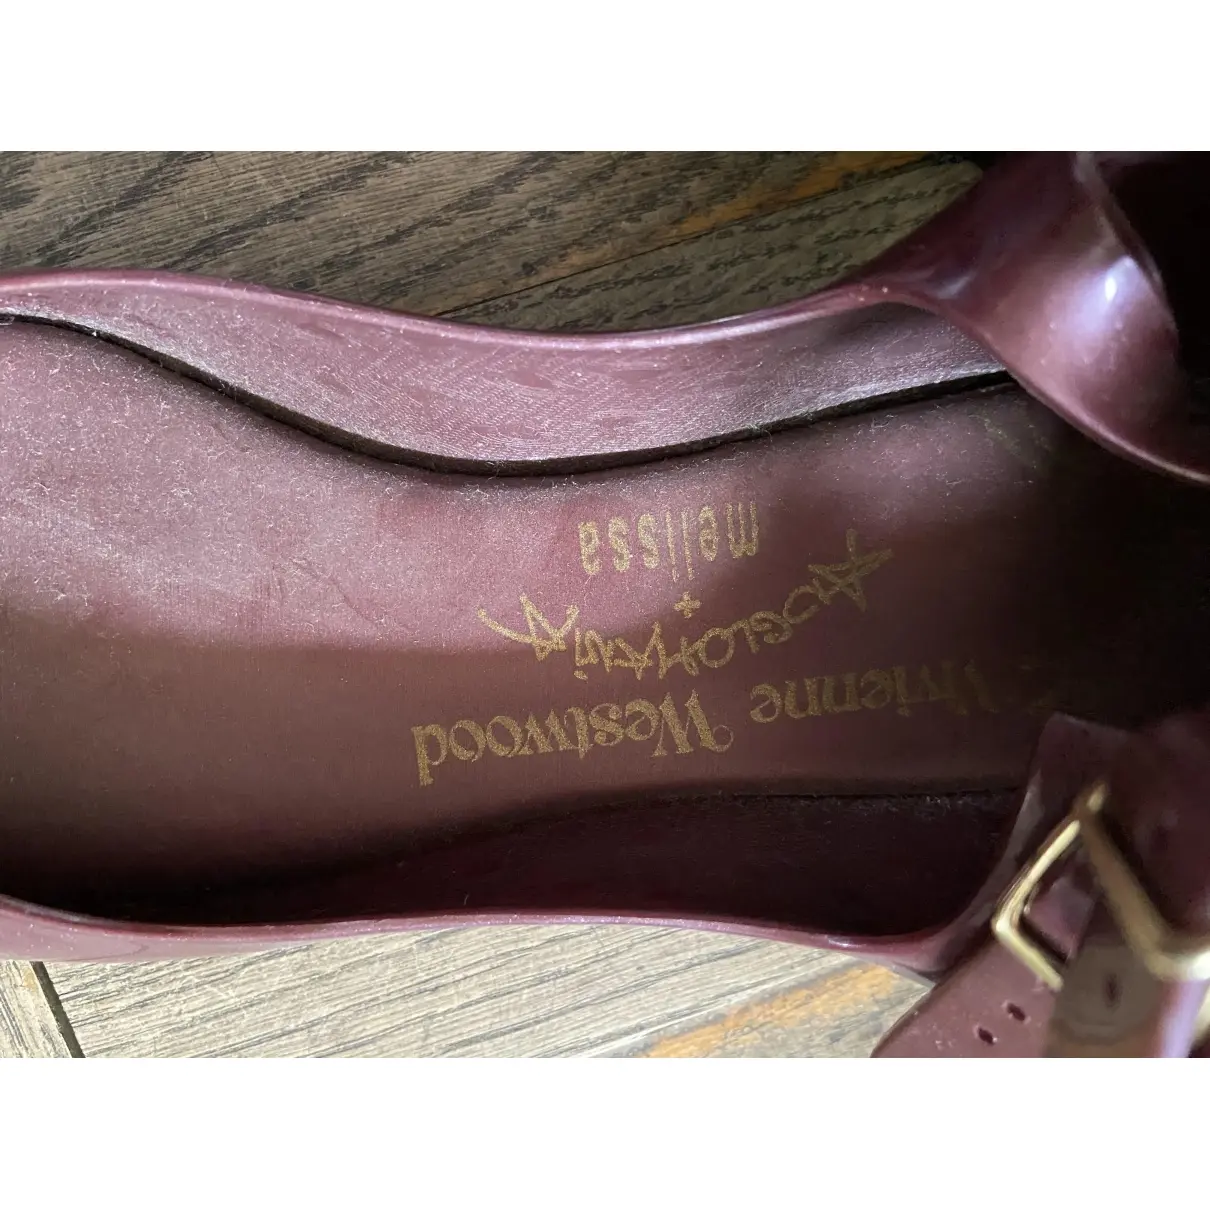 Buy Vivienne Westwood Anglomania Ballet flats online